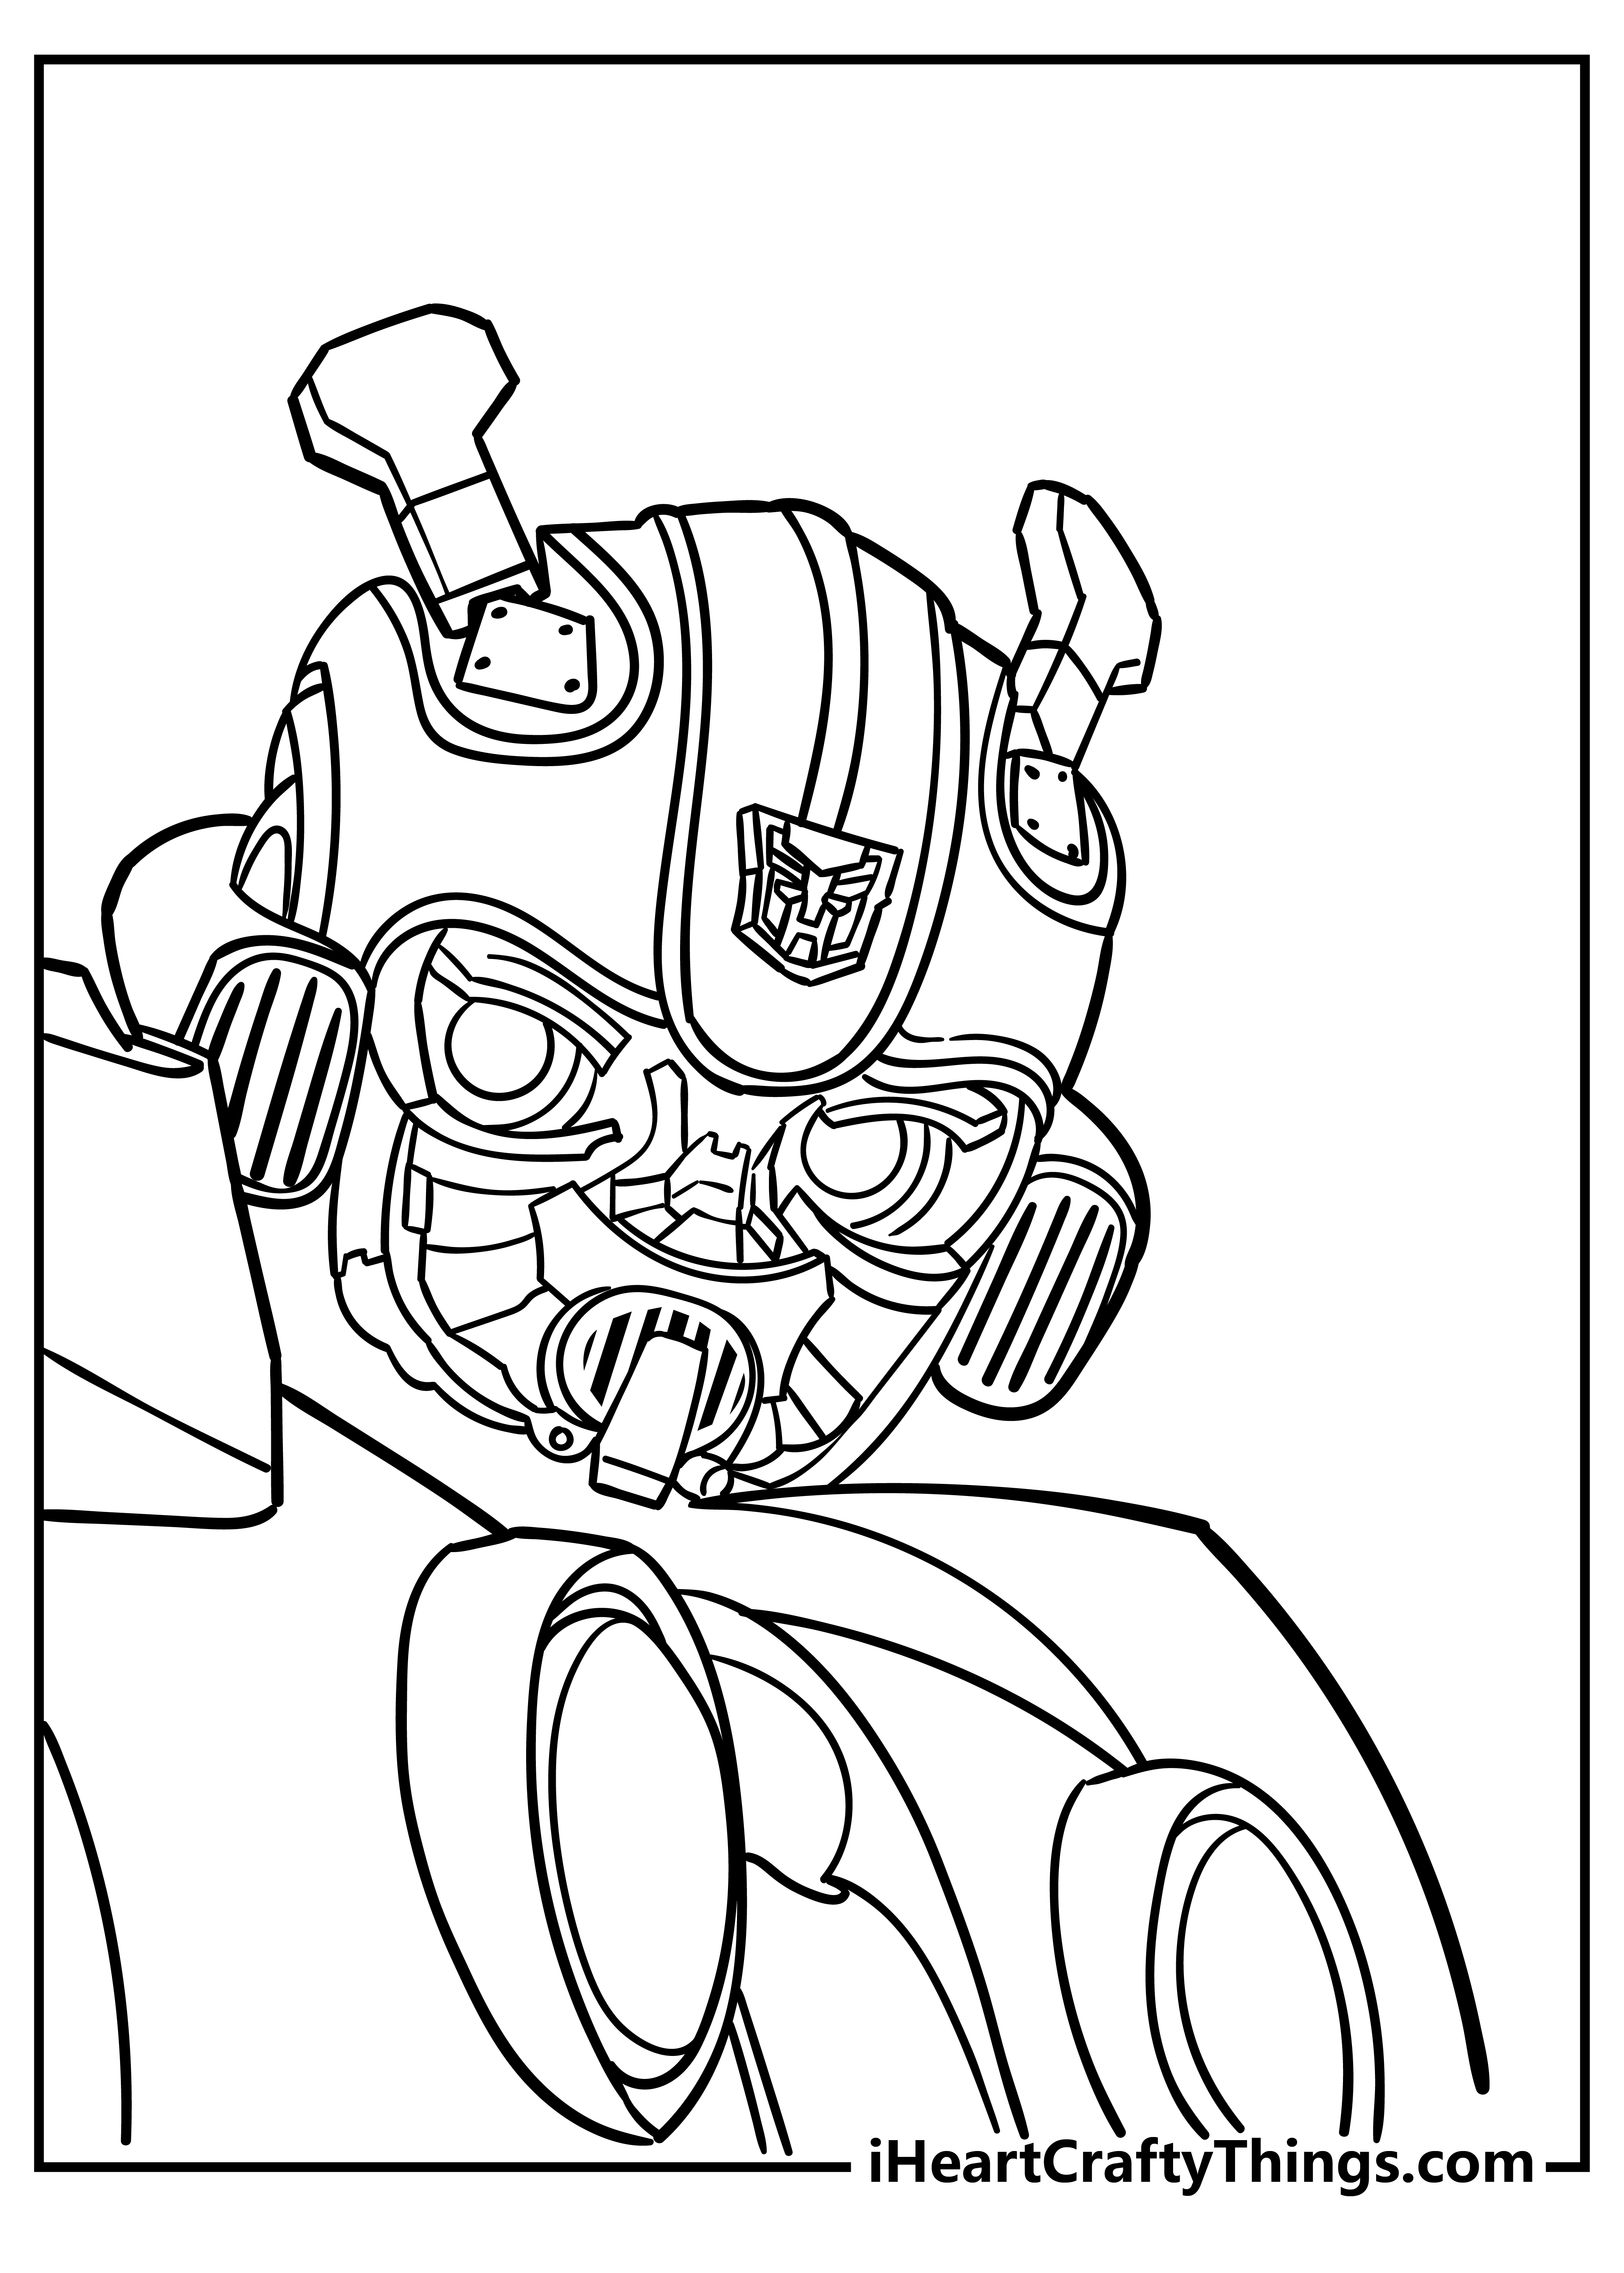 Bumblebee coloring pages bumblebee drawing bee drawing bee coloring pages